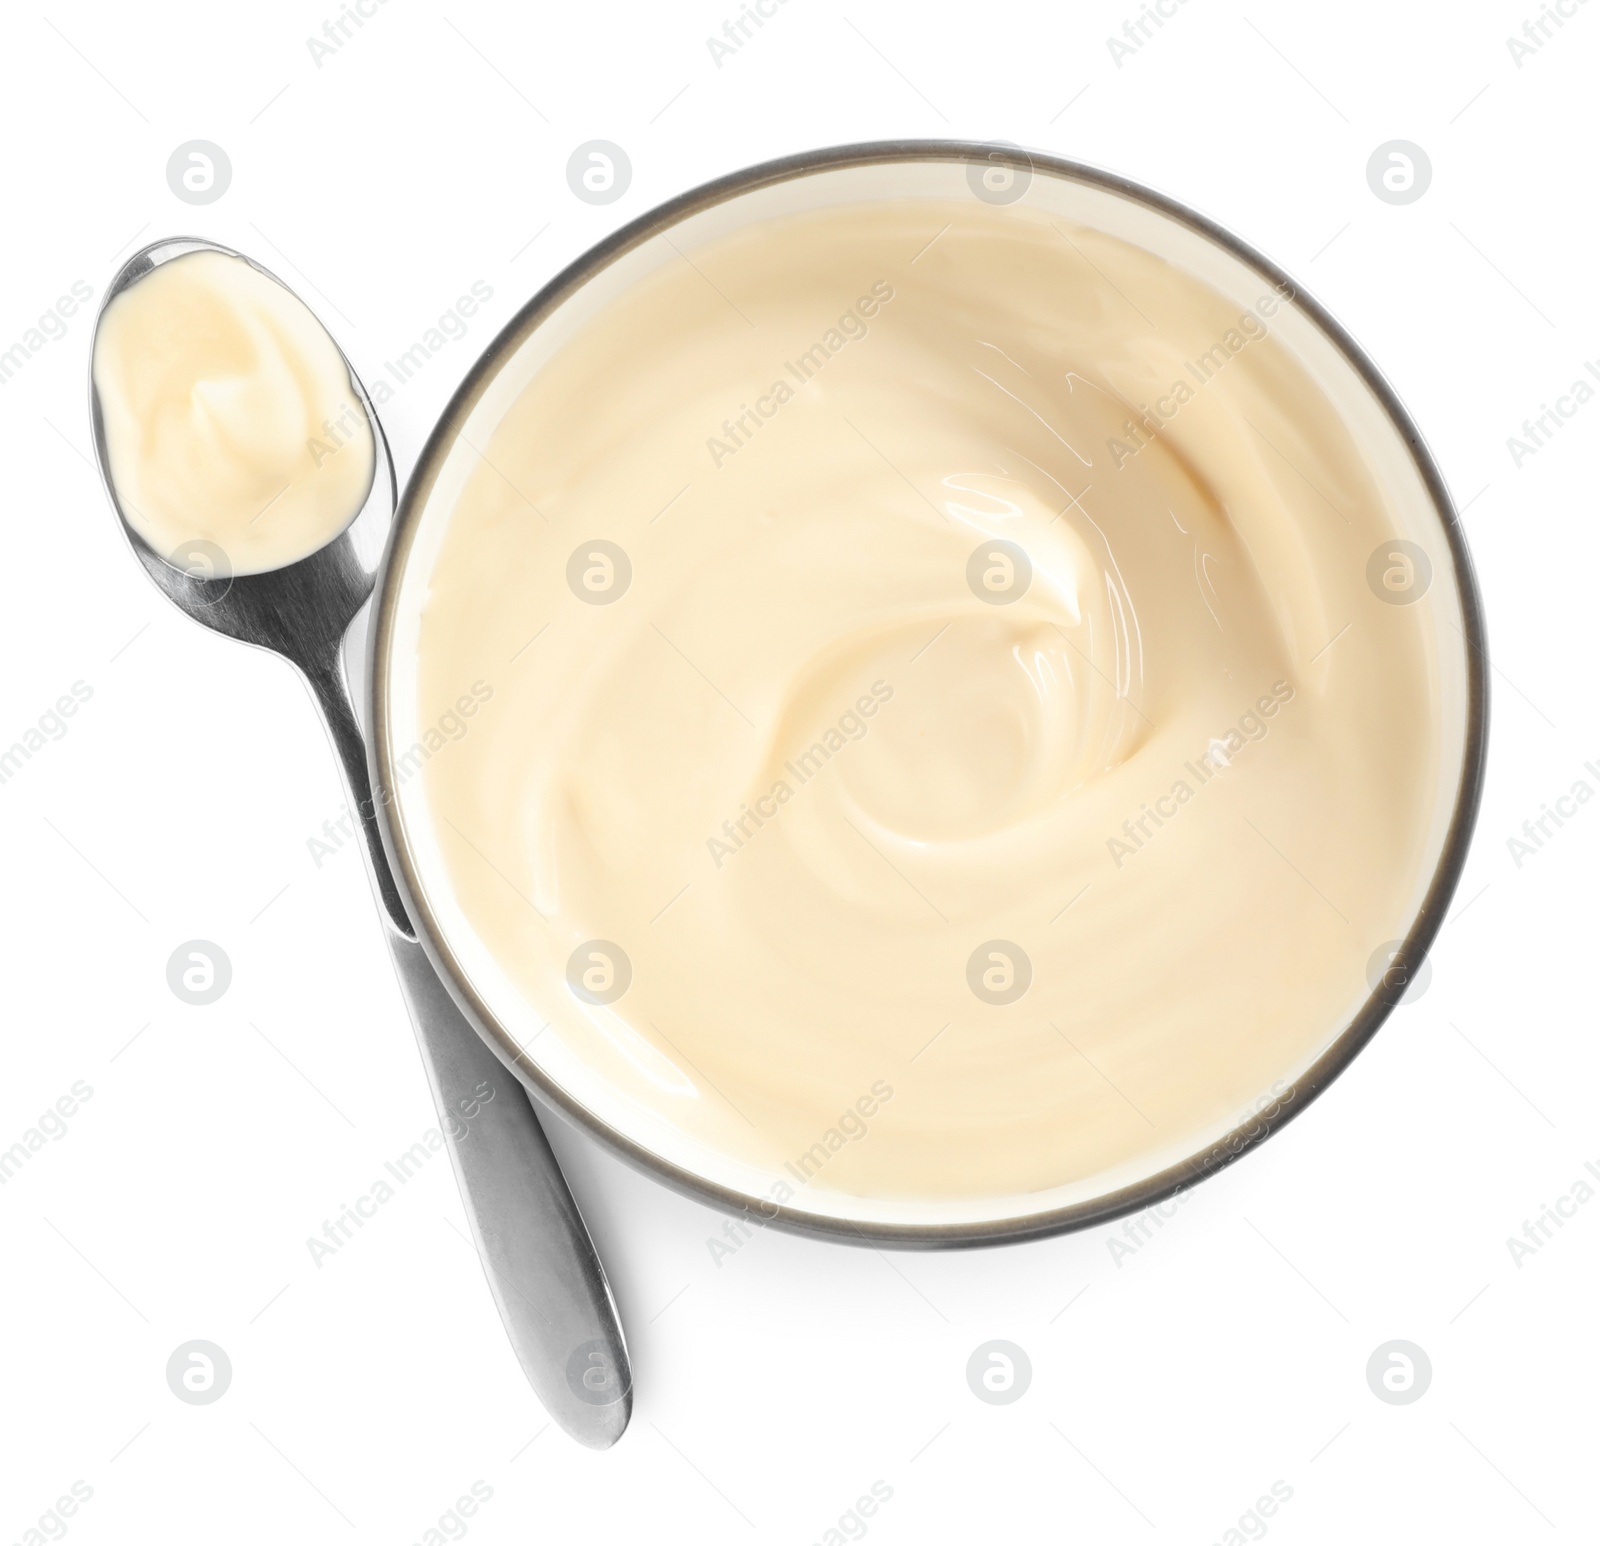 Photo of Ceramic bowl and spoon with mayonnaise on white background